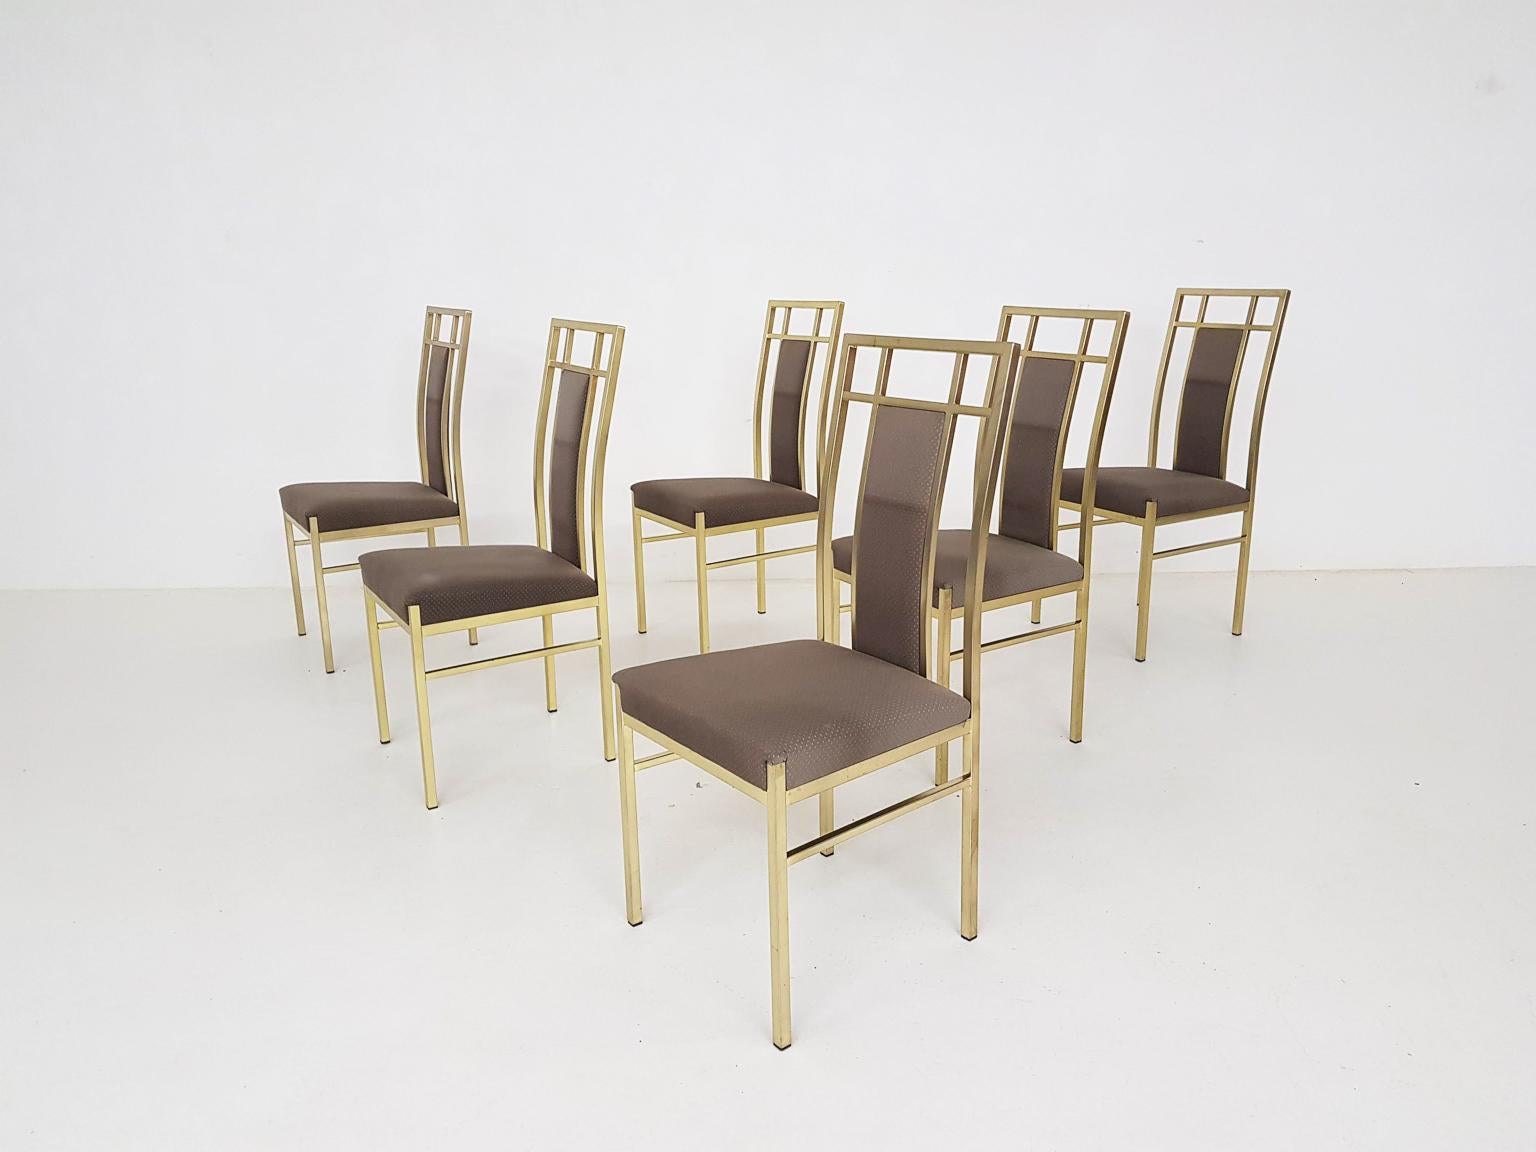 Set of 6 brass colored Hollywood Regency style dining chairs. The fabric is original and has a nice golden pattern, which matches the frame perfectly. The fabric does have some minor stains, but we think it is nicer to keep this original fabric